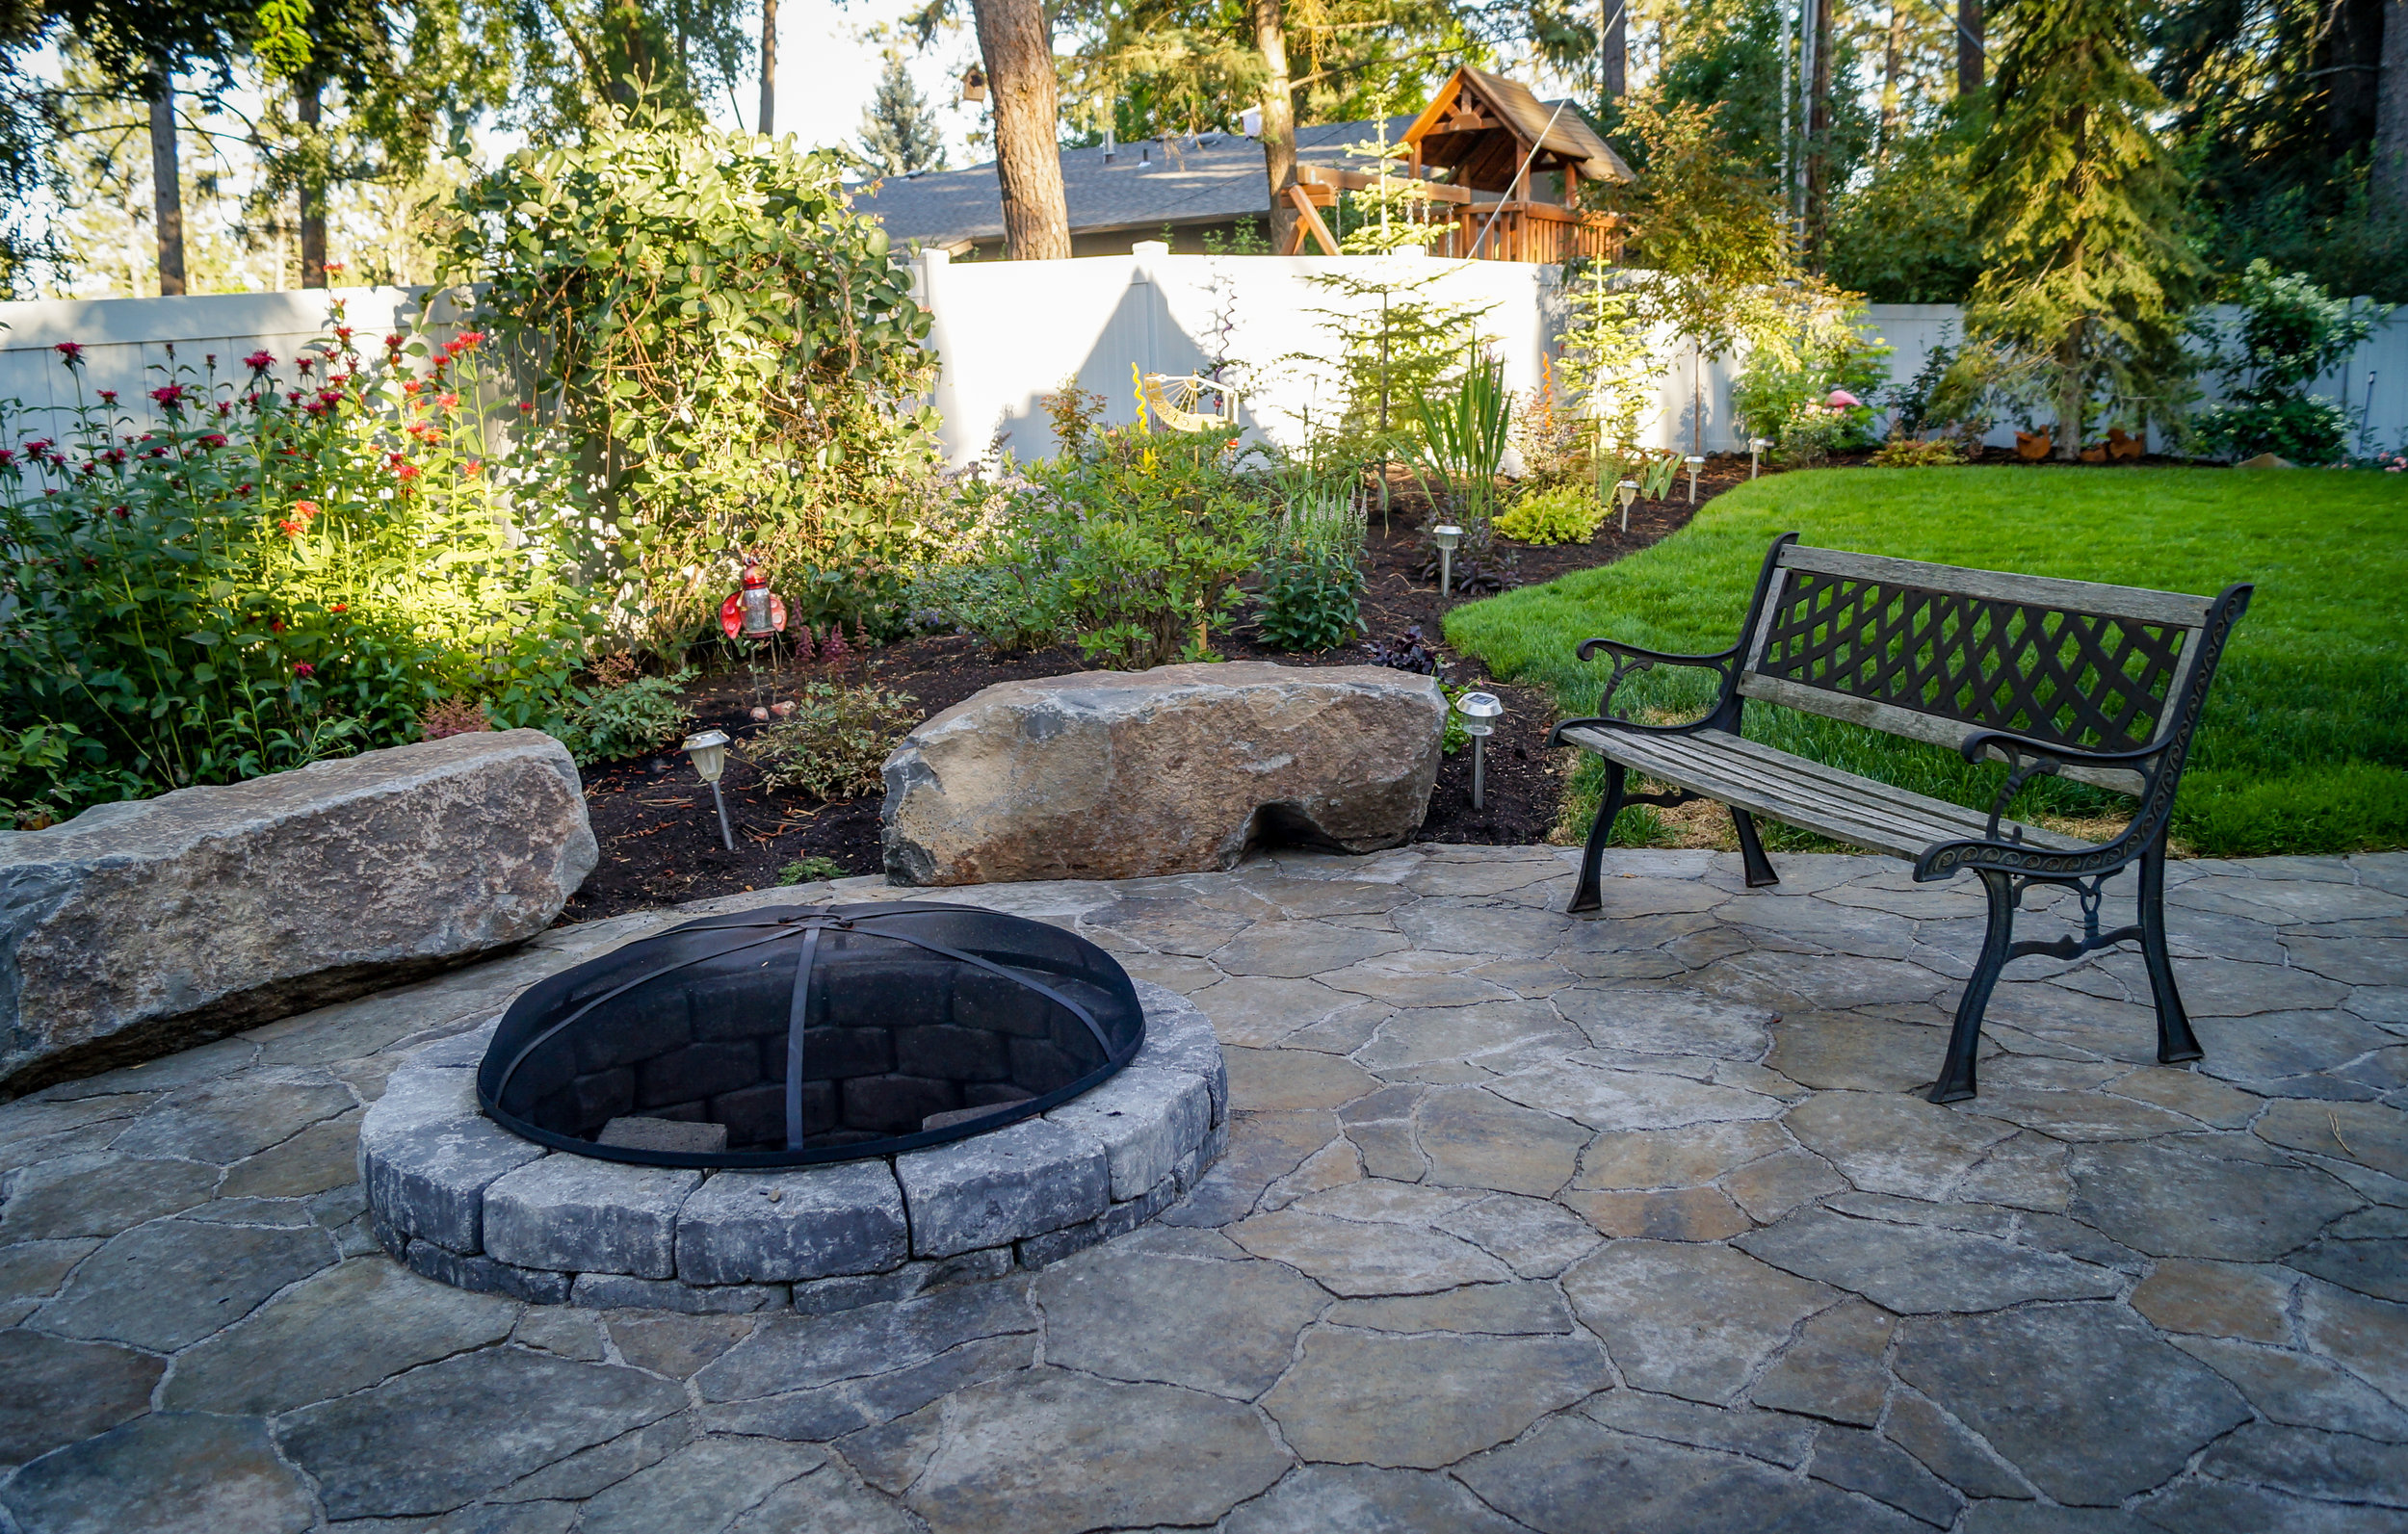 northwest landscaping with stone bench rocks and paver patio around fire pit